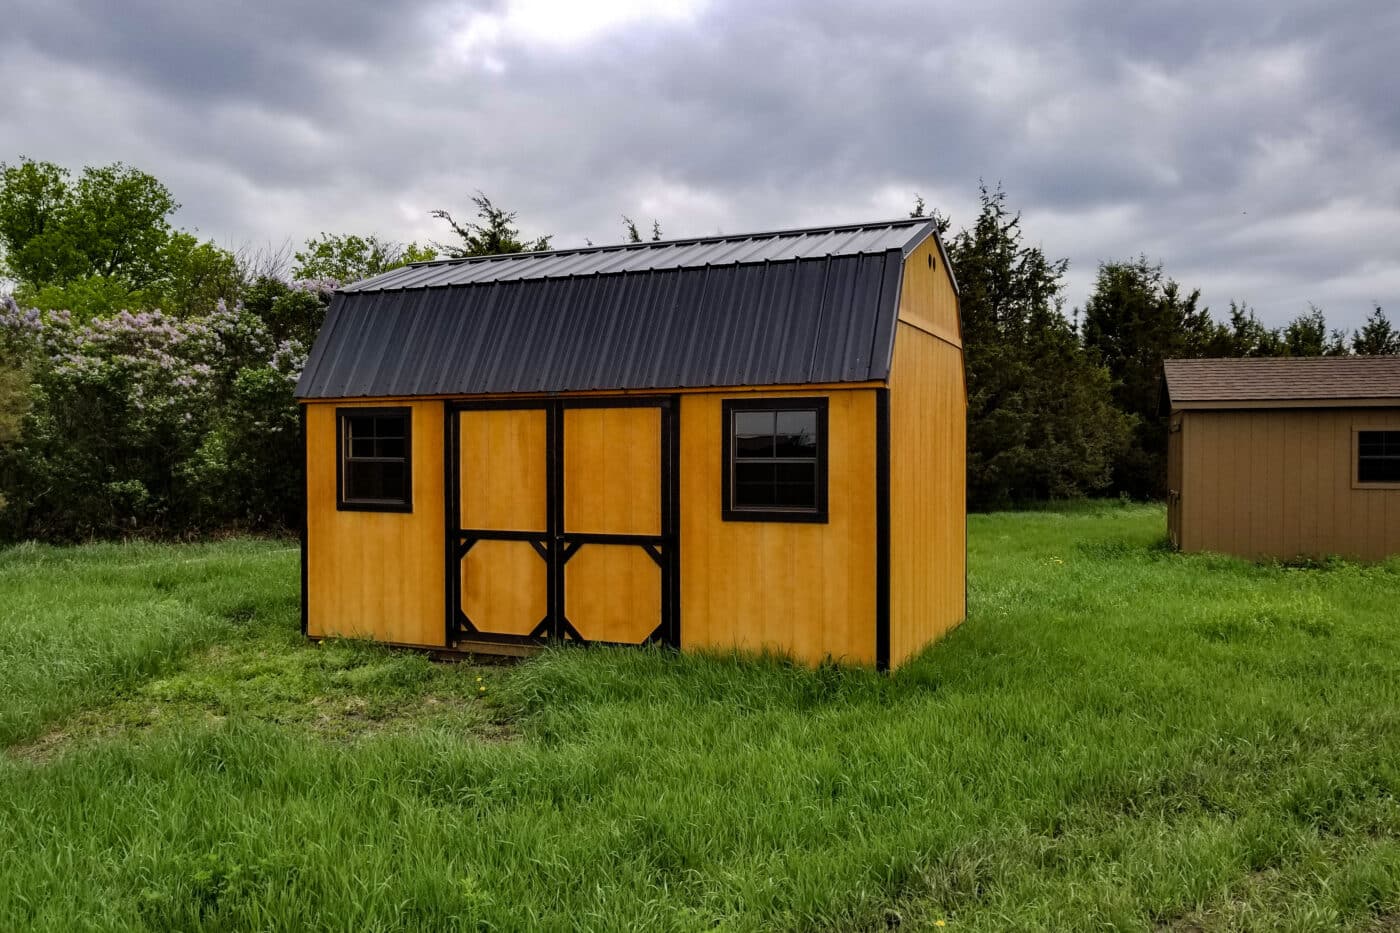 Tan High Barn shed with black roof in field